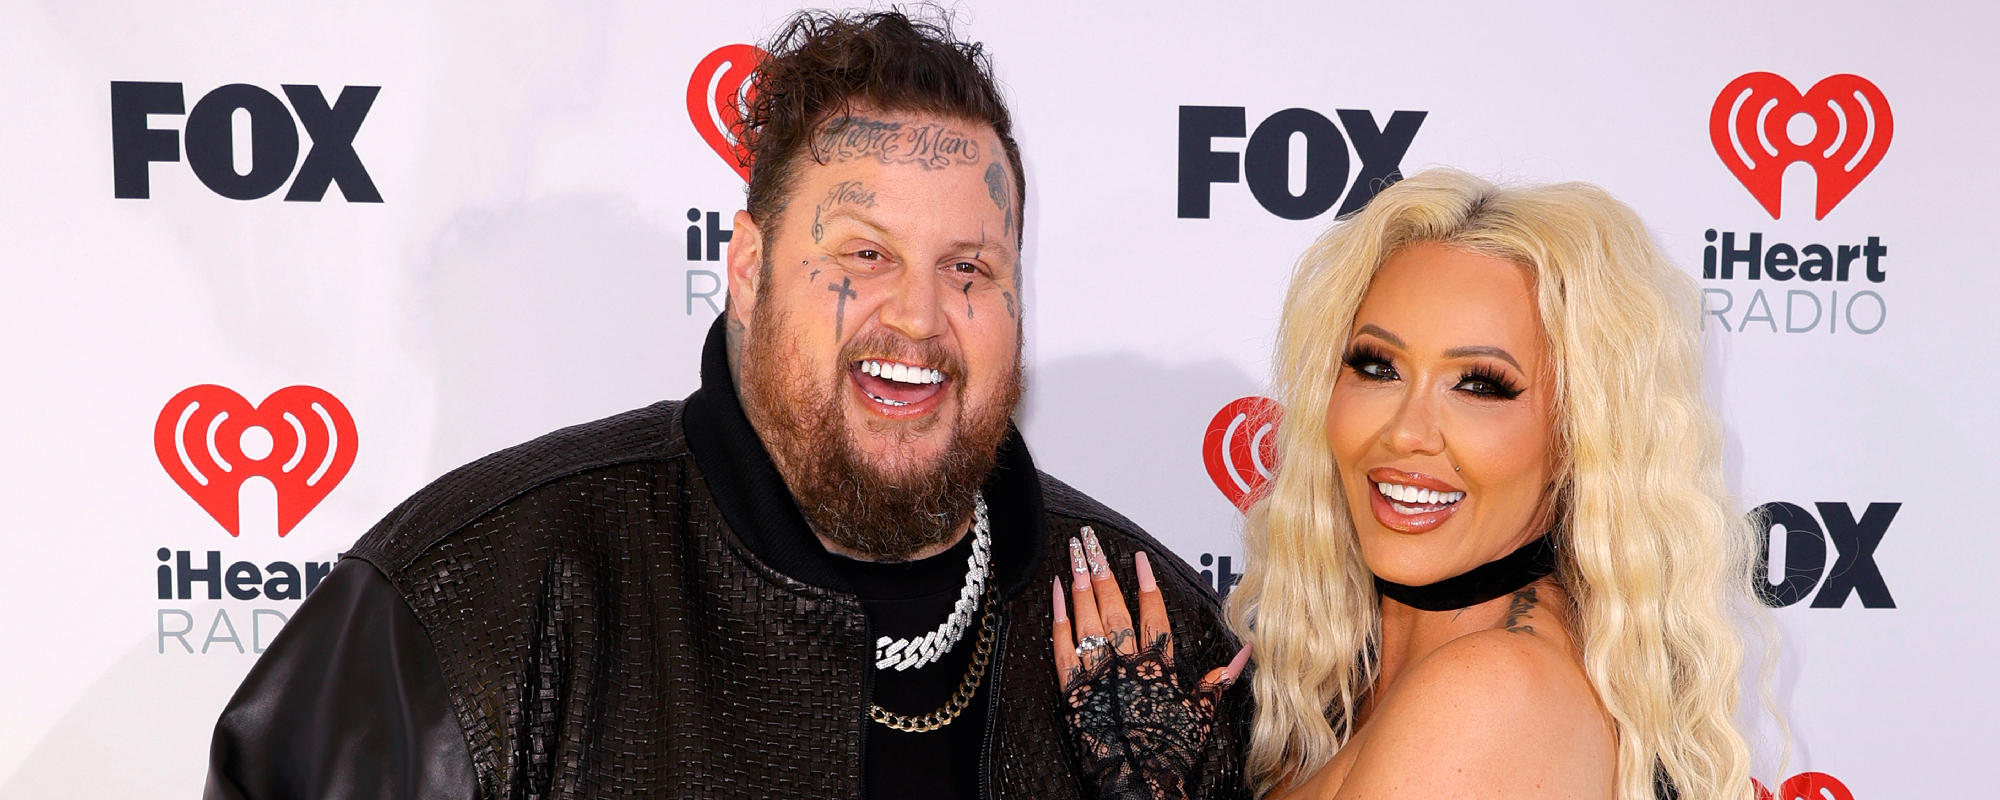 Bunnie Xo Sends Message to CMT Music Awards After Jelly Roll’s Plane Makes Emergency Landing